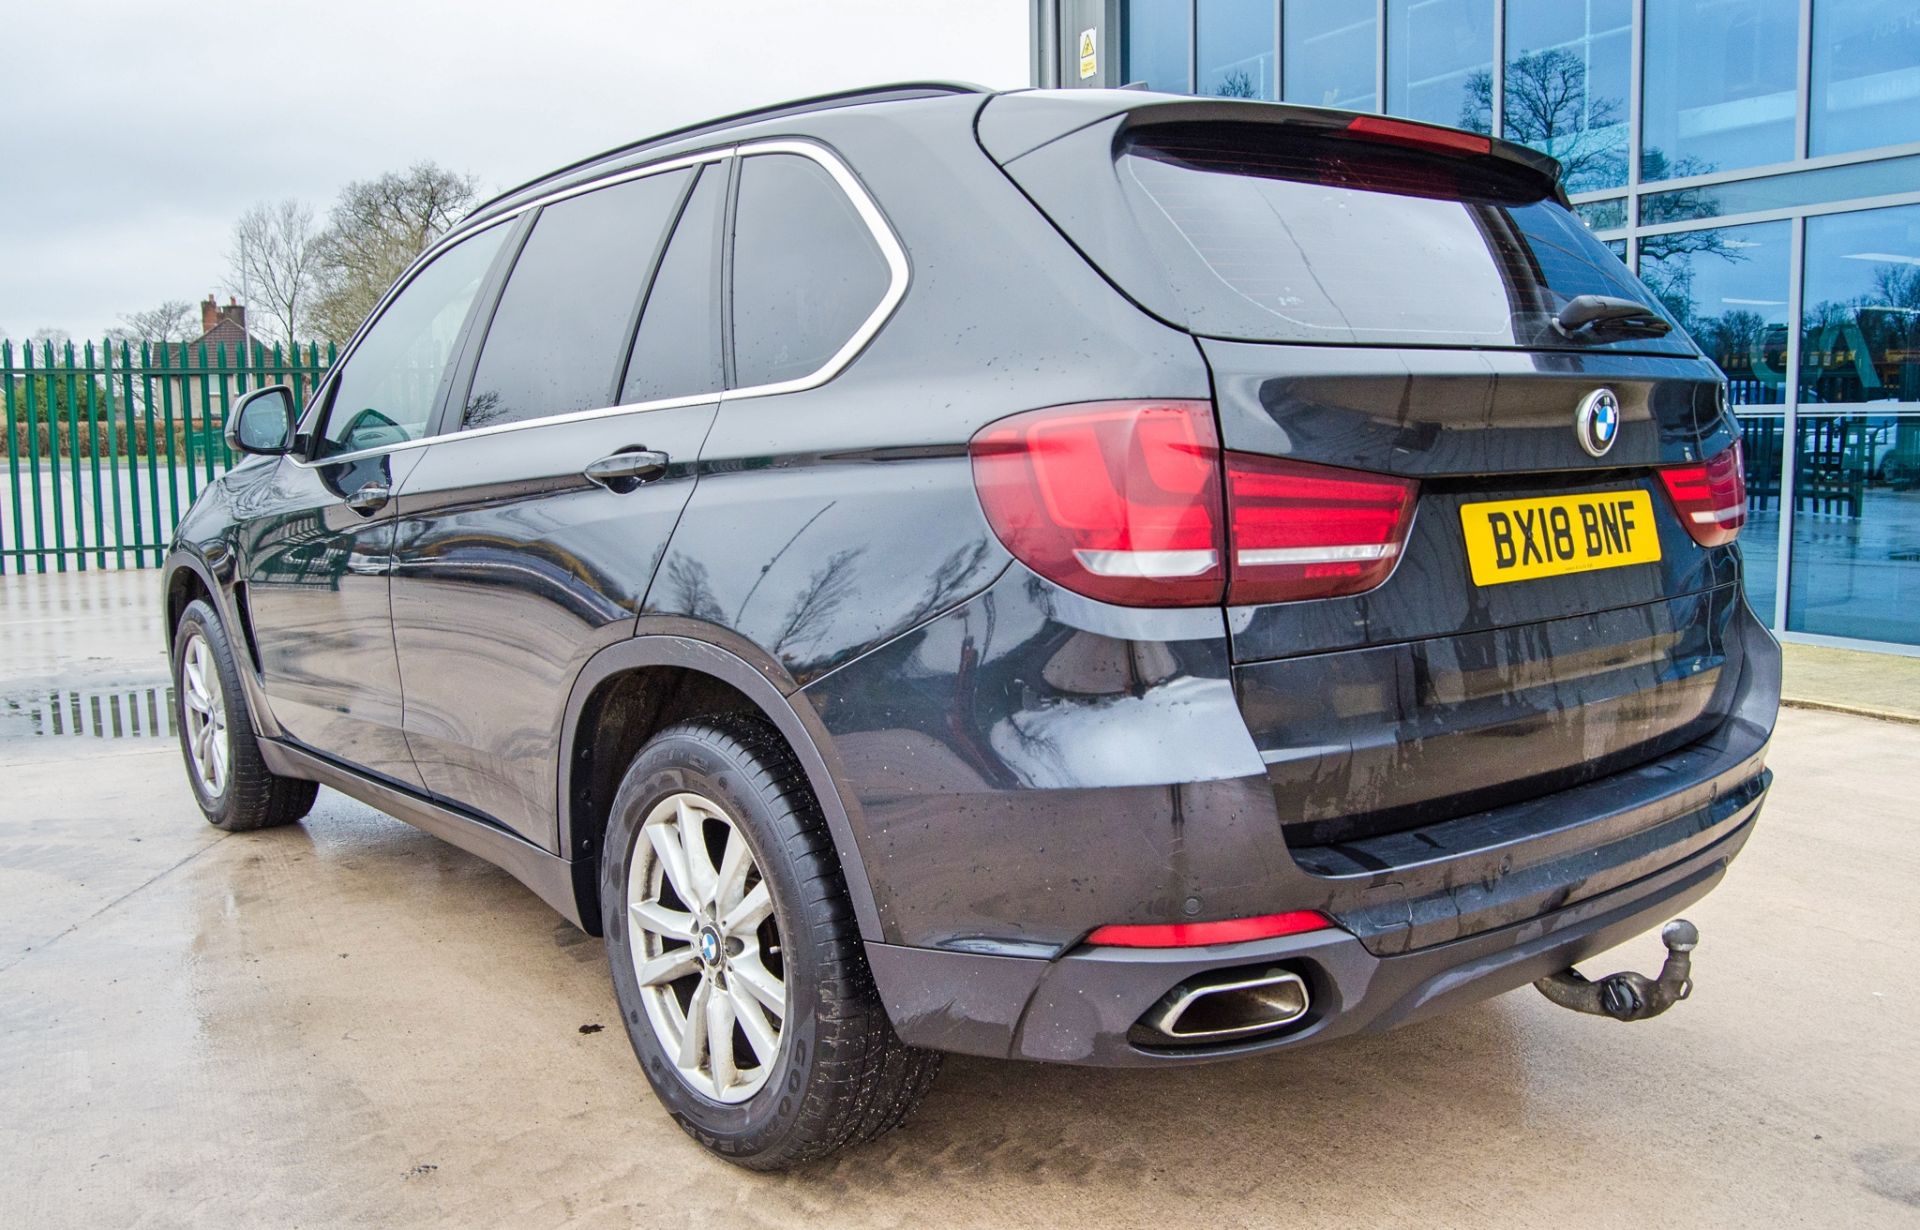 BMW X5 XDRIVE 30D 2999cc diesel automatic estate car EX POLICE Registration Number: BX18 BNF Date of - Image 4 of 32